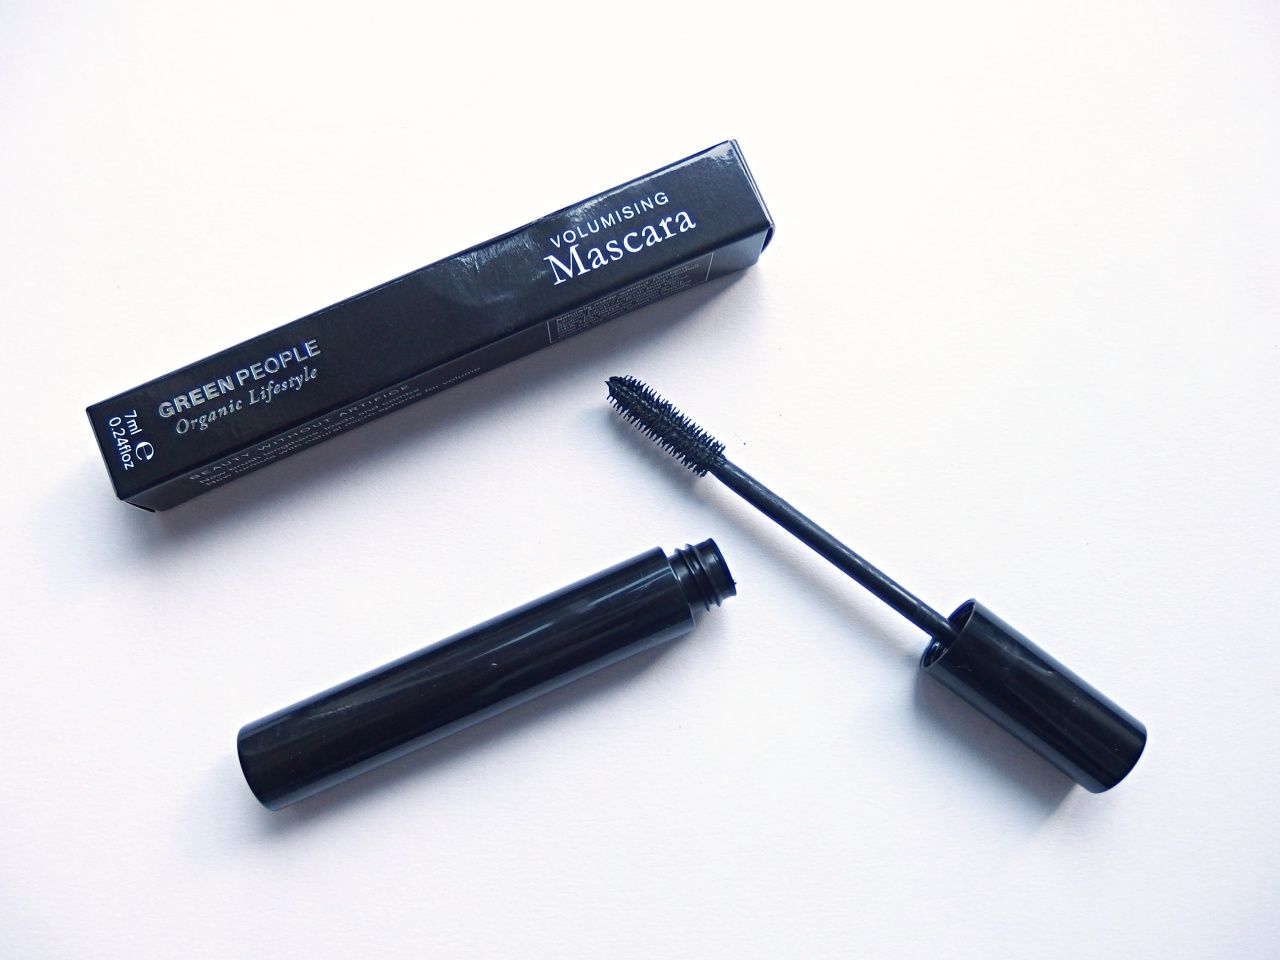 Green People Mascara Review